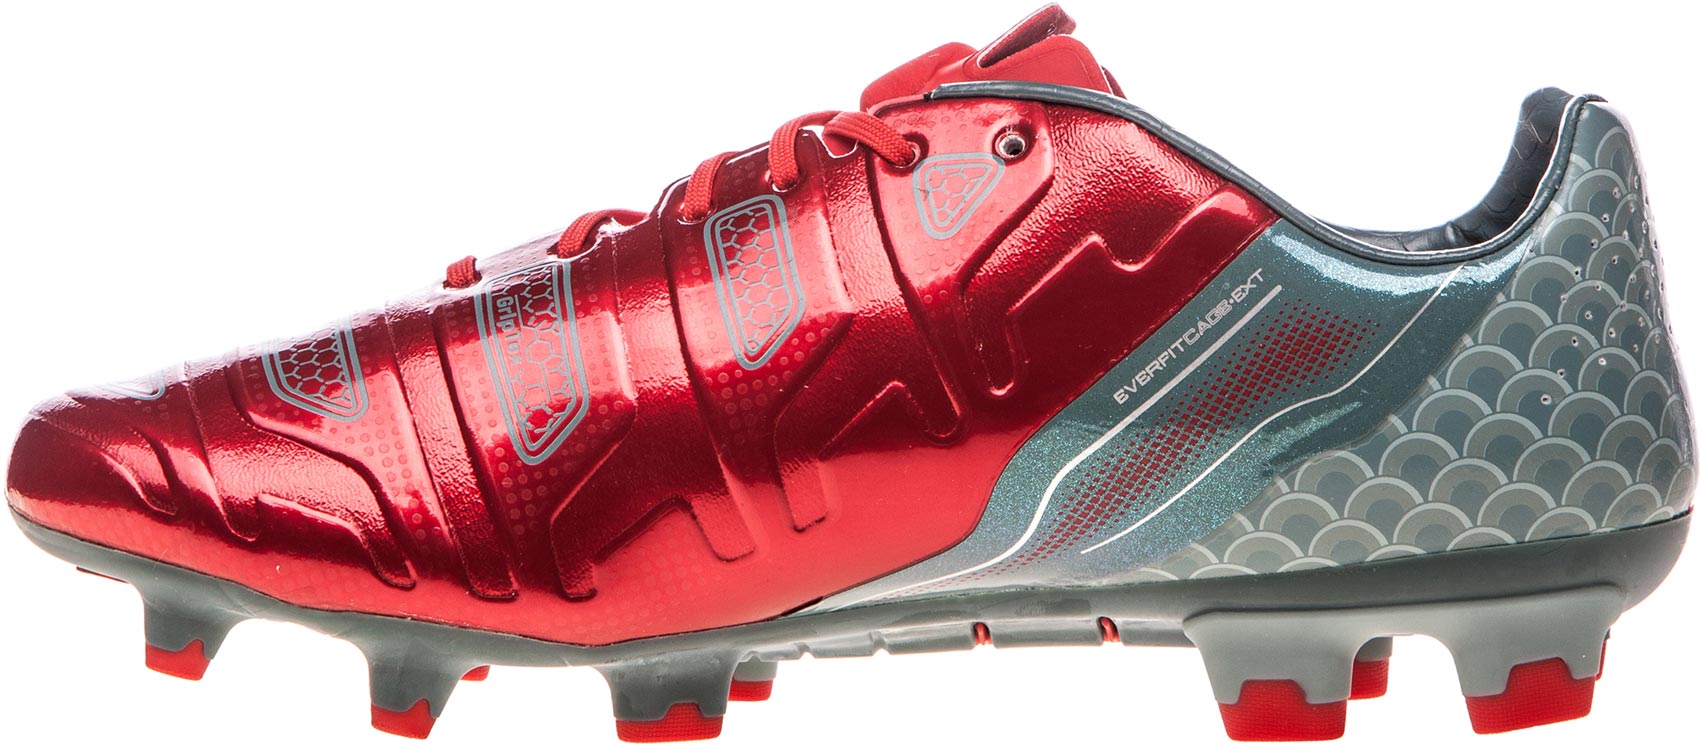 EVOPOWER 1.2 GRAPHIC FG - Football Boots